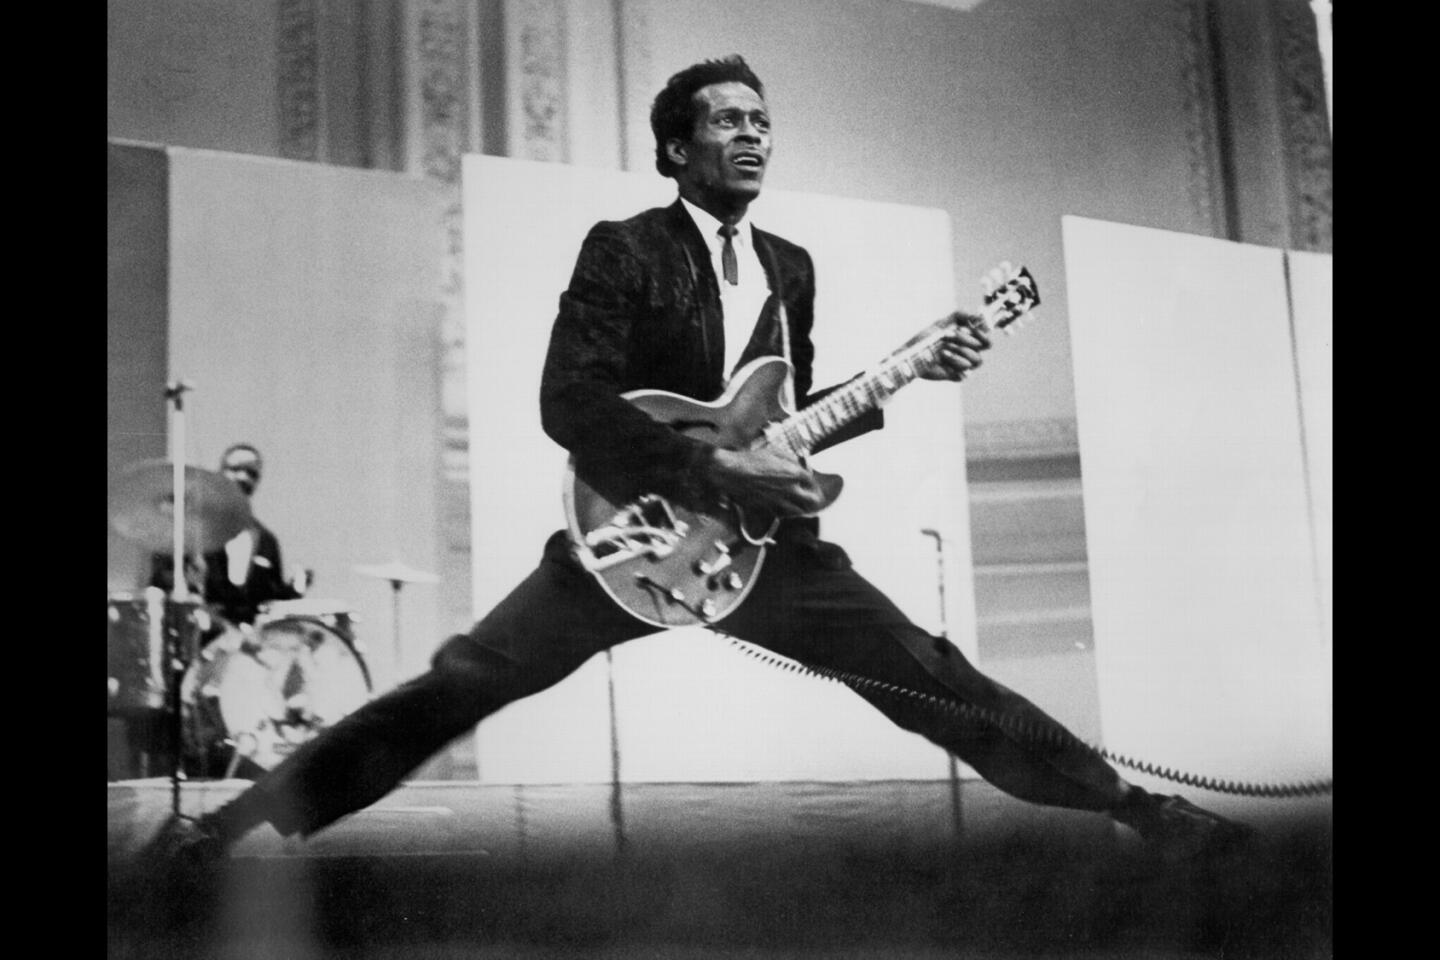 The many moves of rock pioneer Chuck Berry